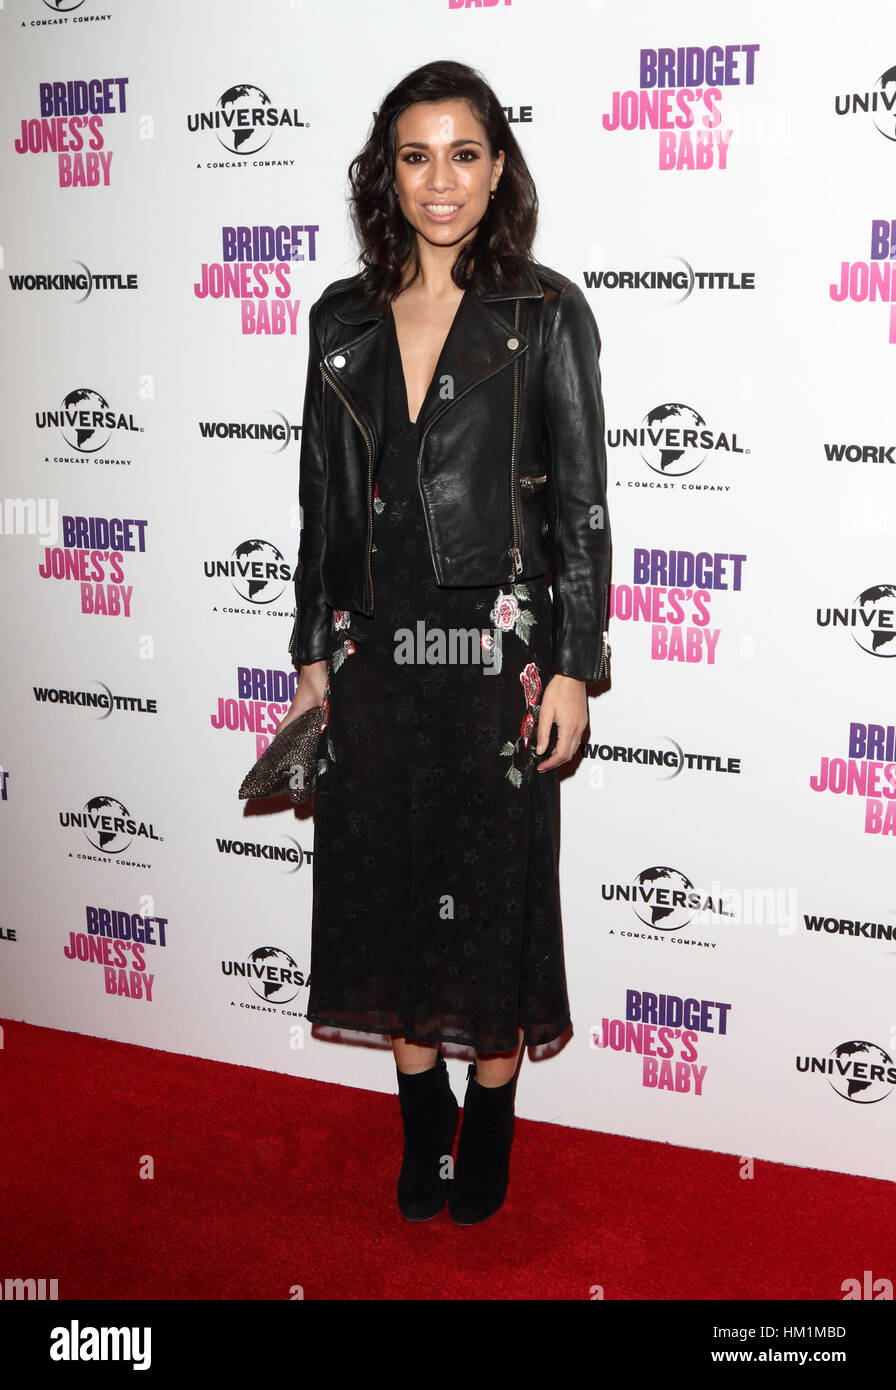 London, UK. 31st Jan, 2017. Fiona Wade at the Bridget Jones Baby DVD Launch and Special Screening at the Charlotte Street Hotel, London.    Credit: KEITH MAYHEW/Alamy Live News Stock Photo